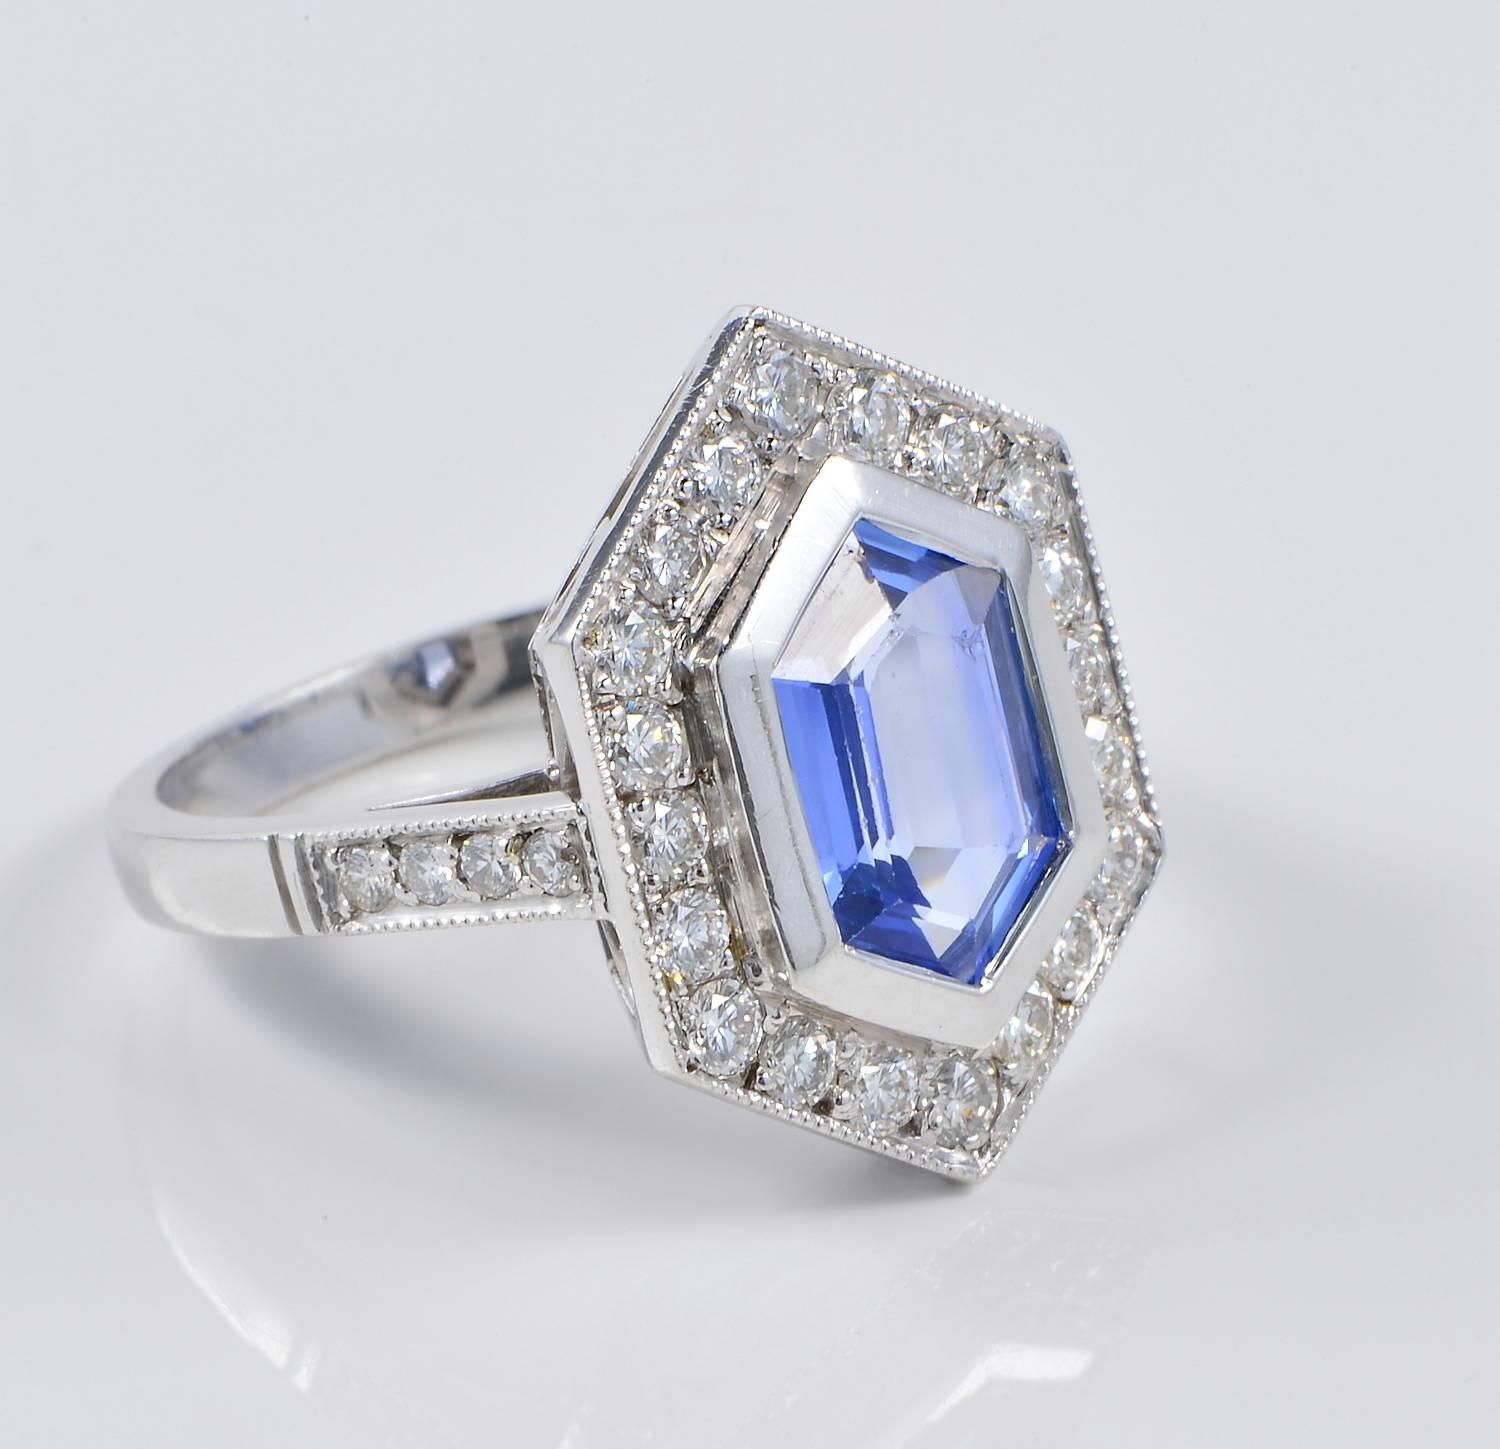 Priced down!

This  absolutely beautiful vintage ring dates 1960 ca
A truly knockout Natural Ceylon Sapphire no heat or treated in any way is the star of the crown, beautifully complemented with loads of Diamonds, combined with a one off designed